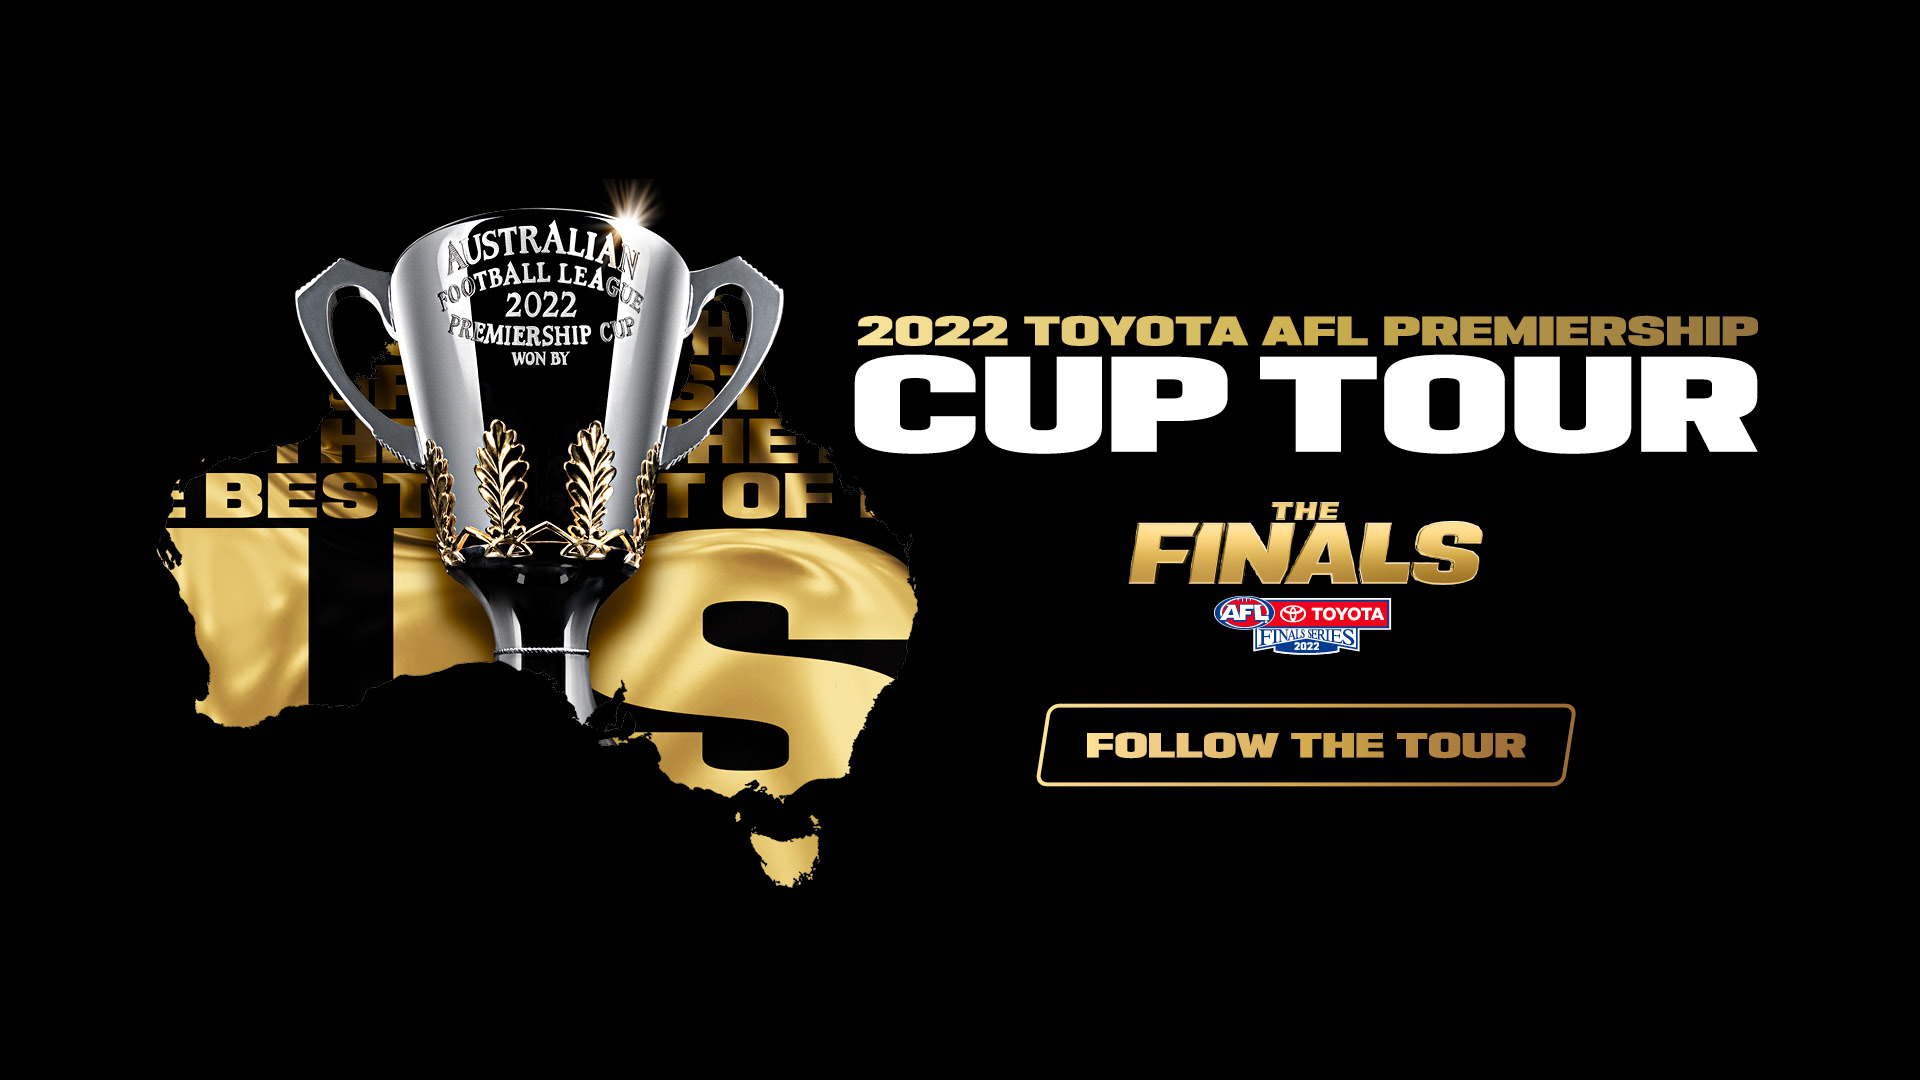 2022 Toyota AFL Premiership Cup Tour coming to Moorooka featured image